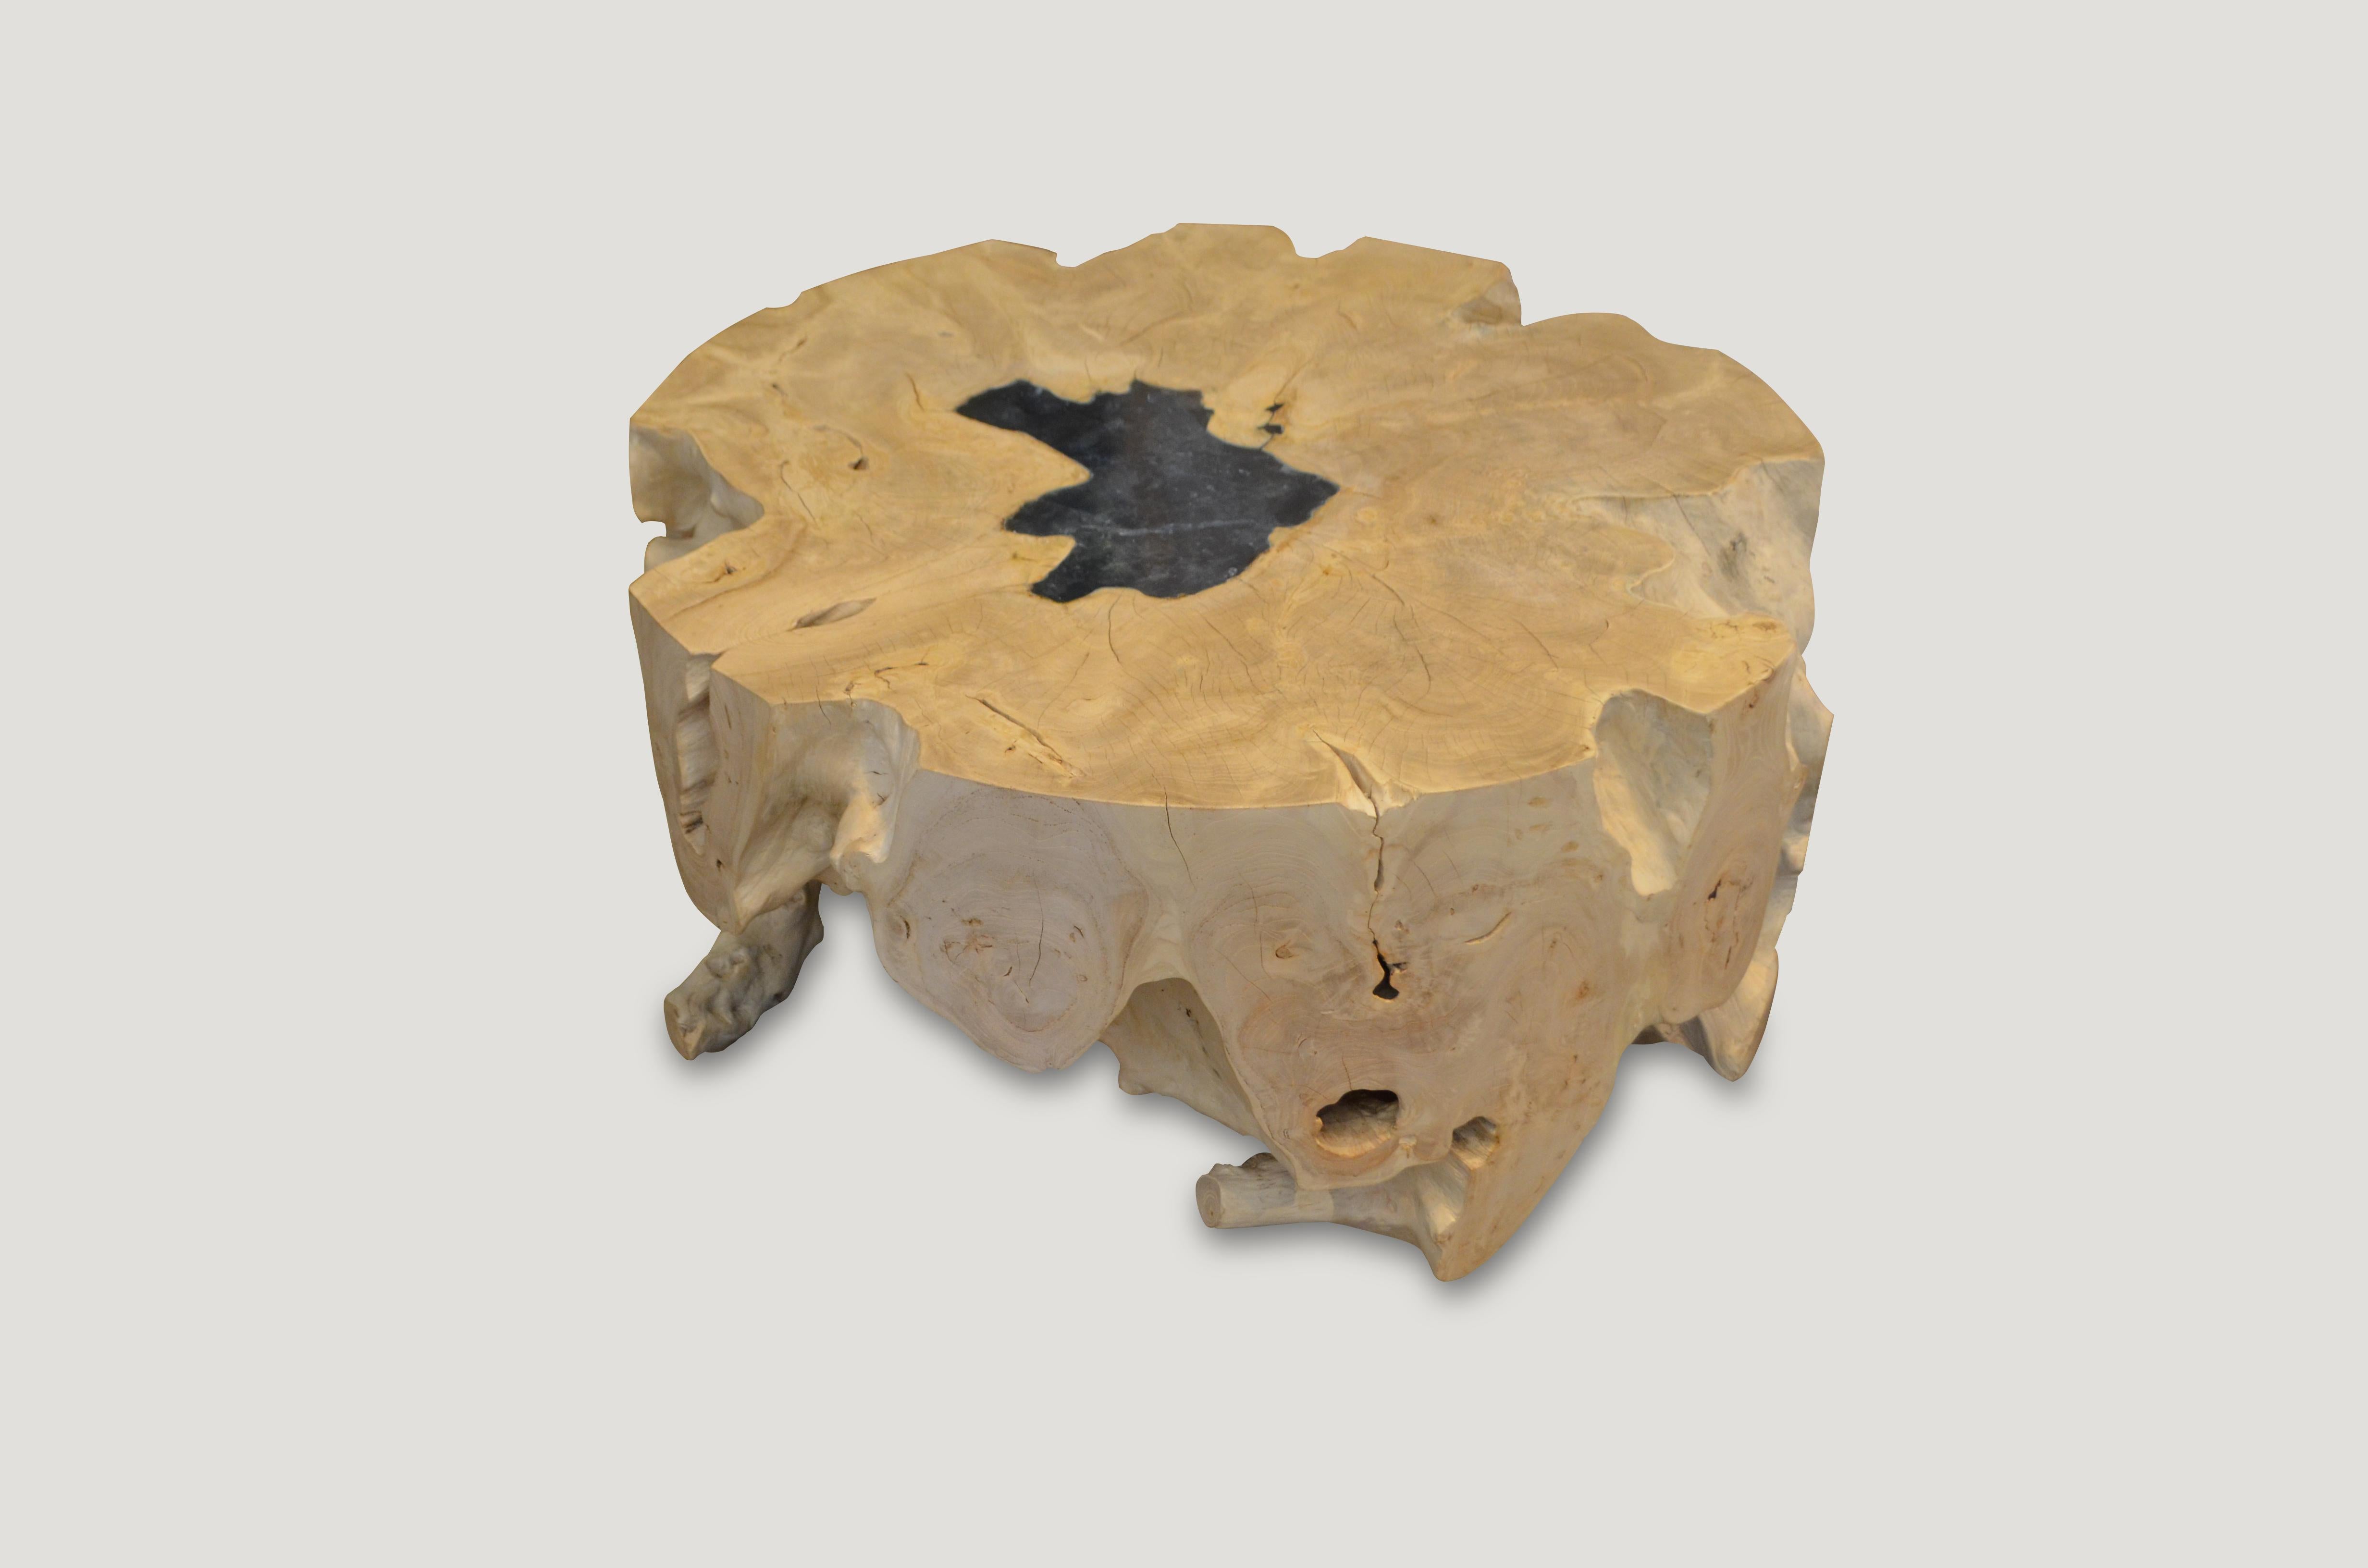 Impressive single root coffee table, hand carved into this round shape. We have added ice blue cracked resin to the top.

The St. Barts Collection features an exciting new line of organic white wash and natural weathered teak furniture. The